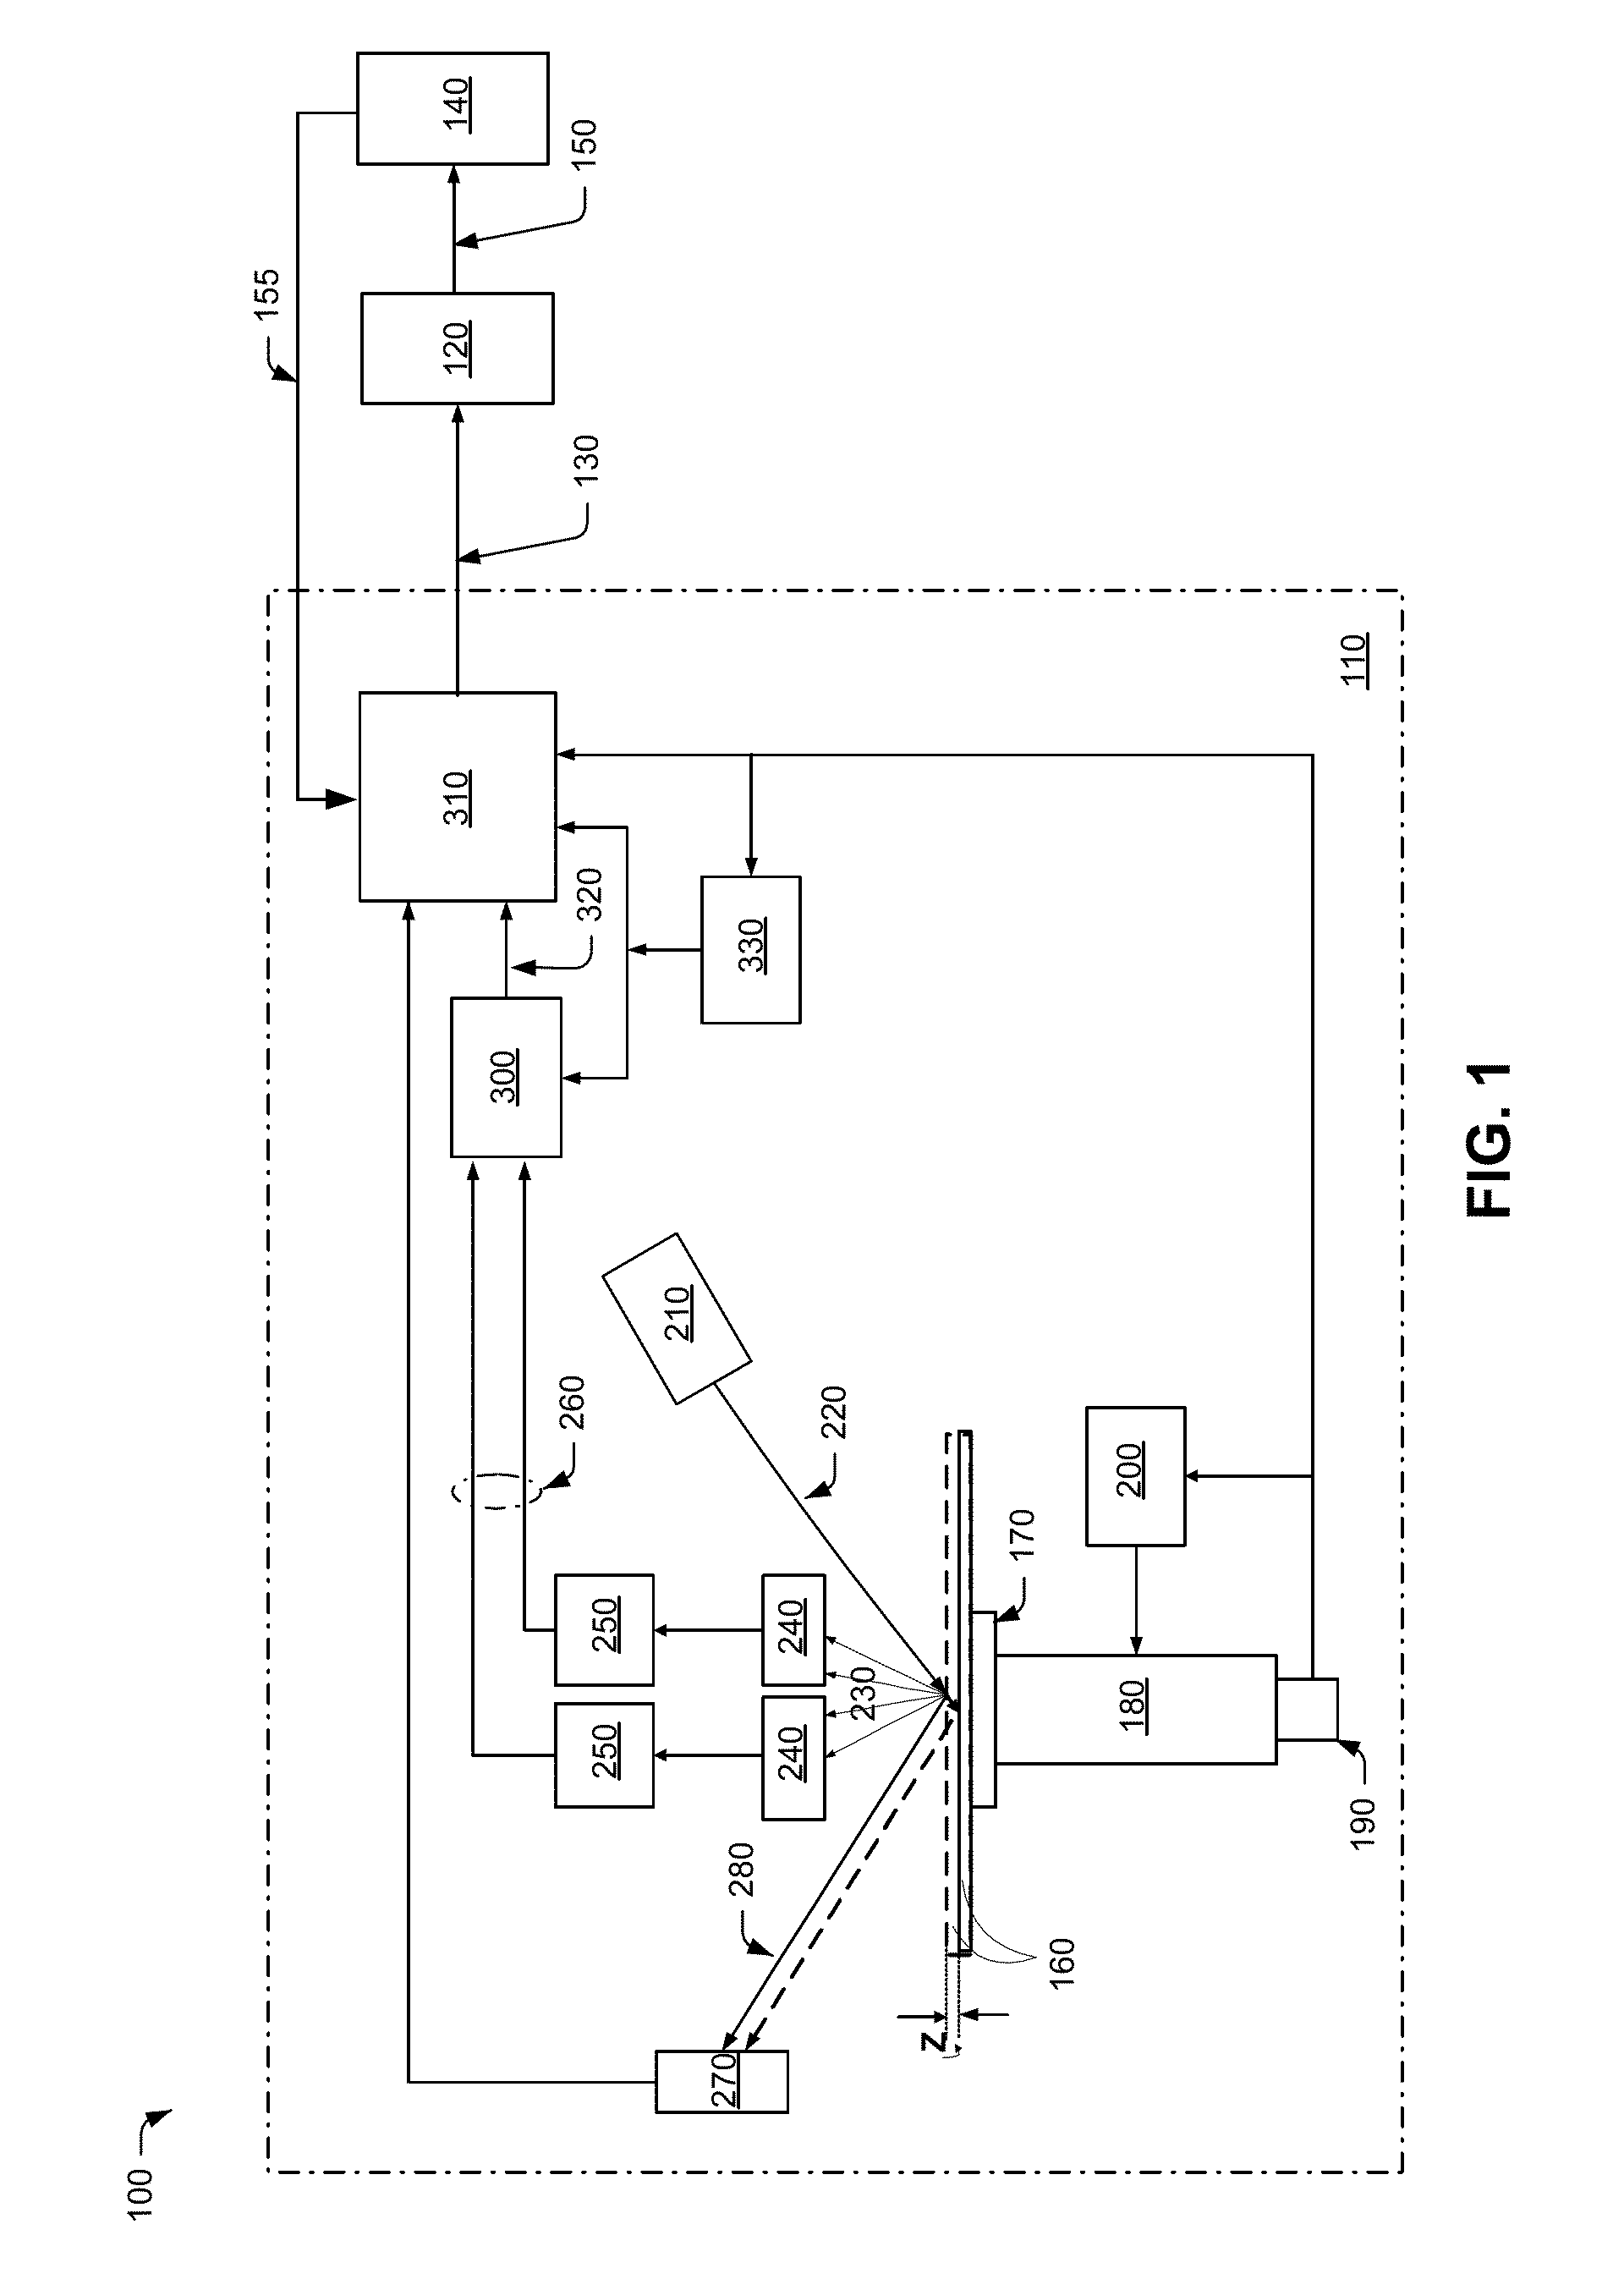 Inspection system and method for high-speed serial data transfer